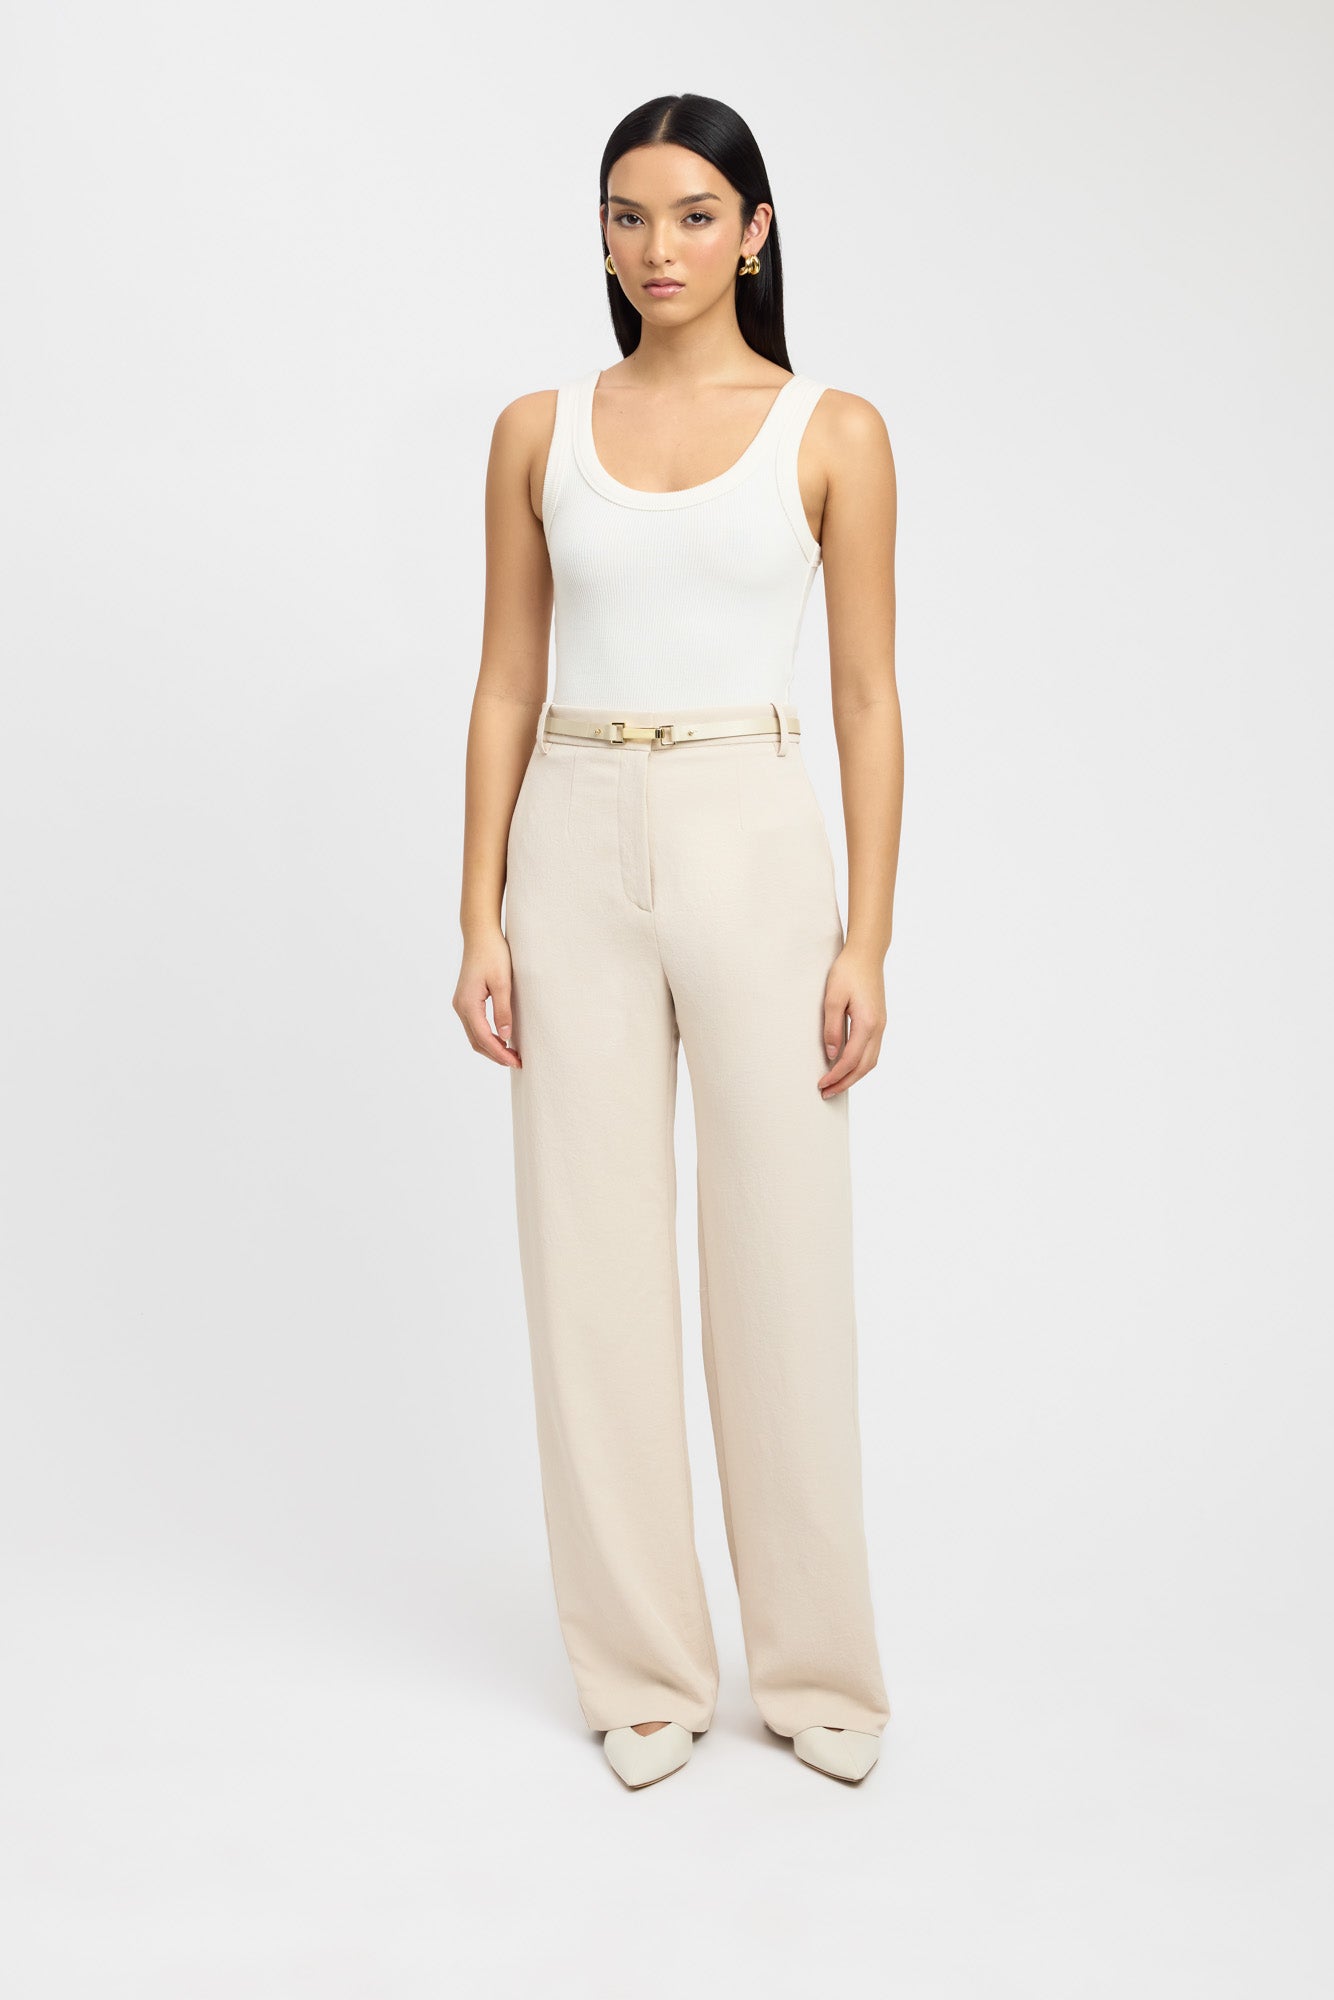 Irena High Waisted Tailored Pants by Shona Joy Online | THE ICONIC |  Australia